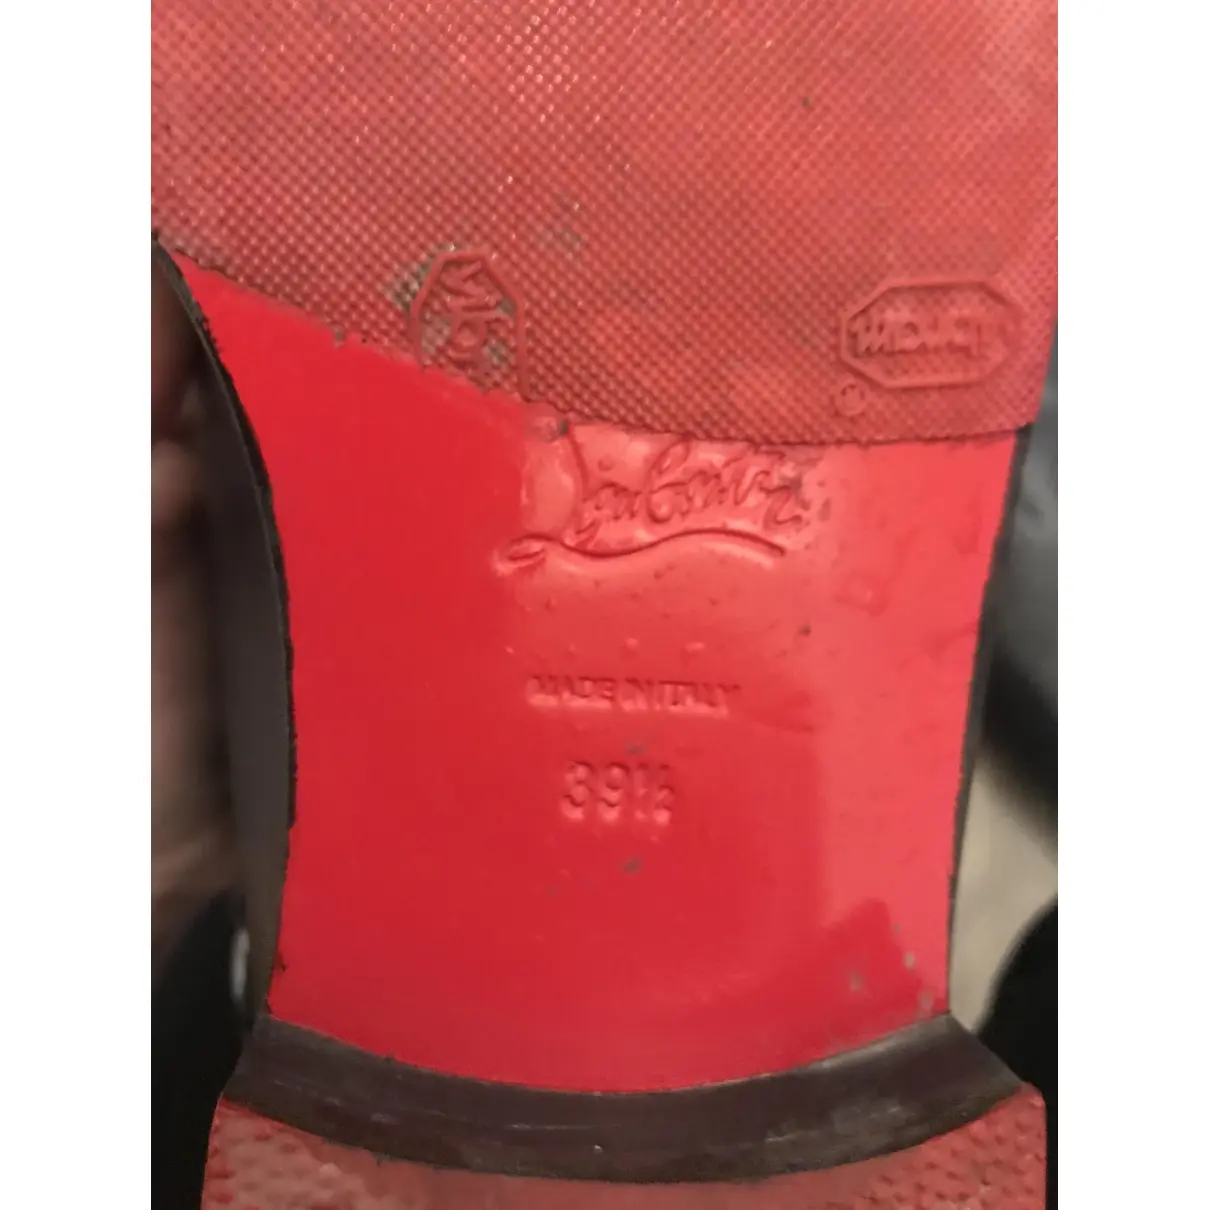 Buy Christian Louboutin Egoutina leather riding boots online